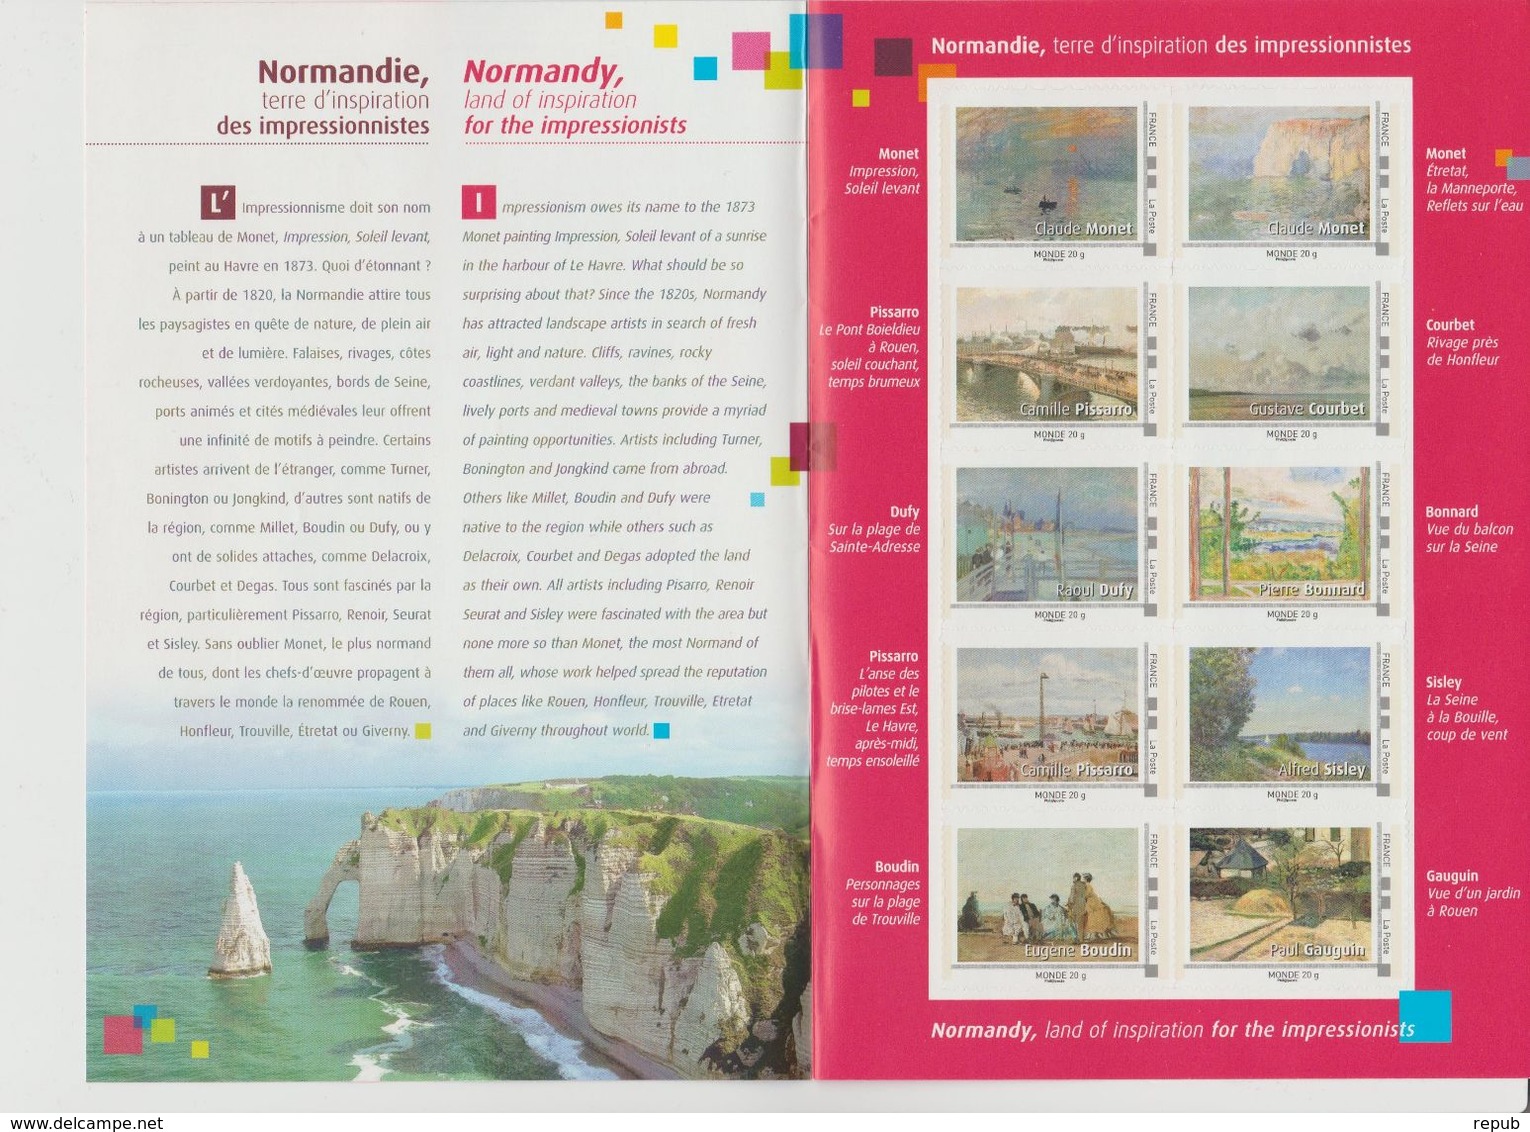 France Collector Normandie Impressionnistes - Collectors